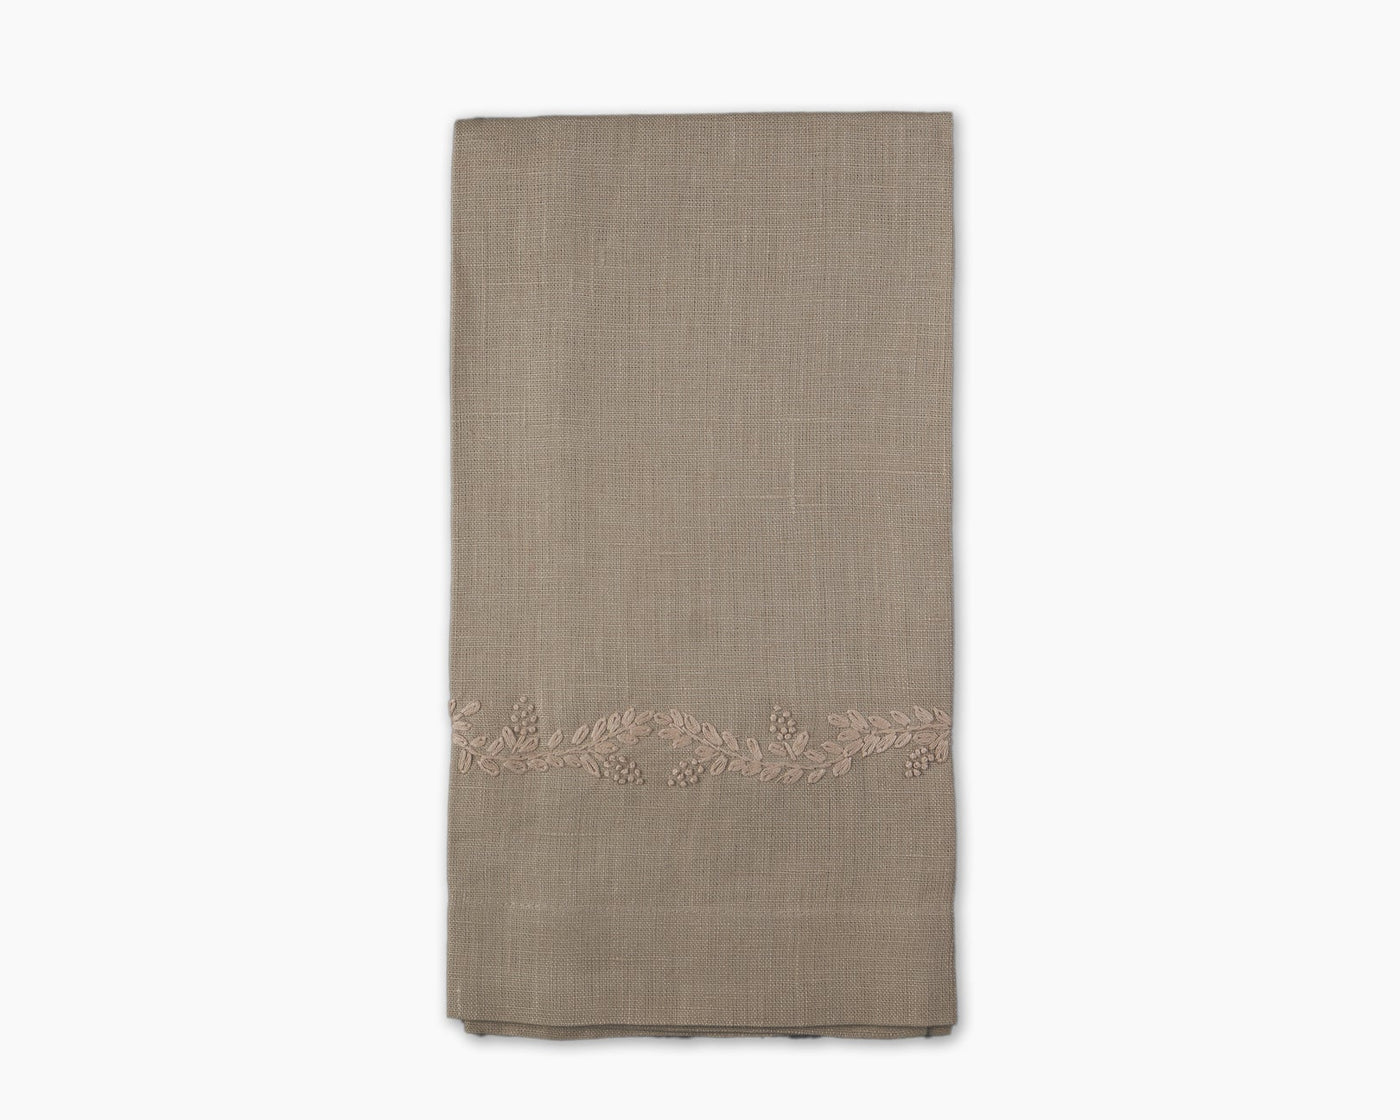 Prism Vine Linen Hand Towels in Sand, Set of Two